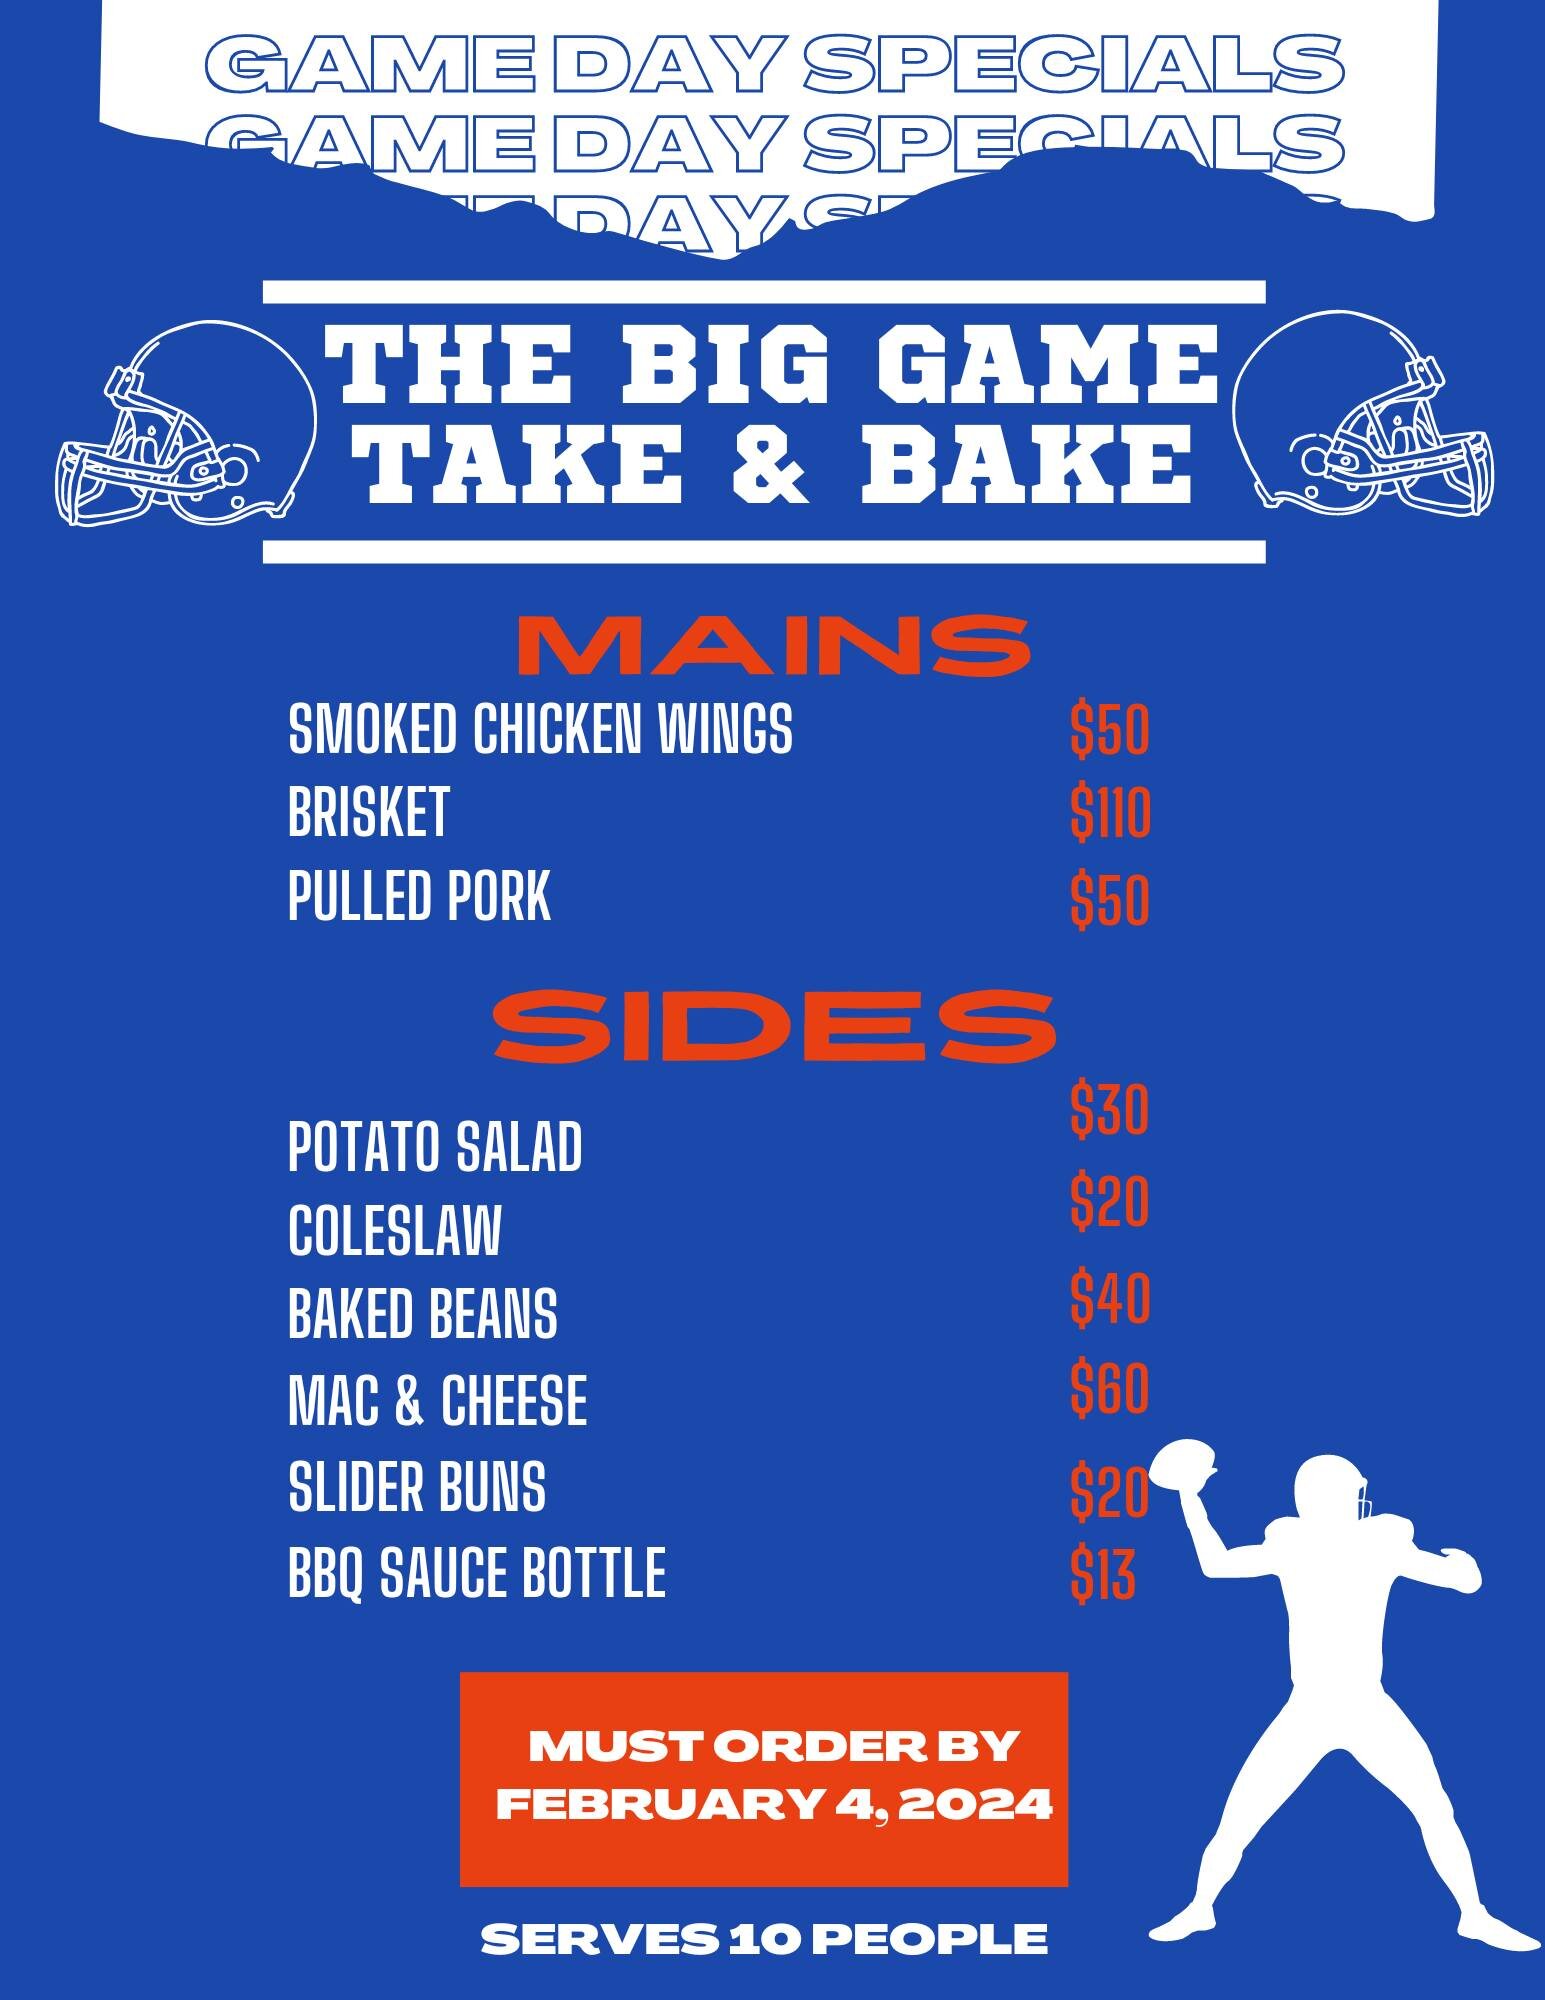 LAST CHANCE! 

Give us a call today to get your Take and Bake reserved for the Big Game! 517-518-8196